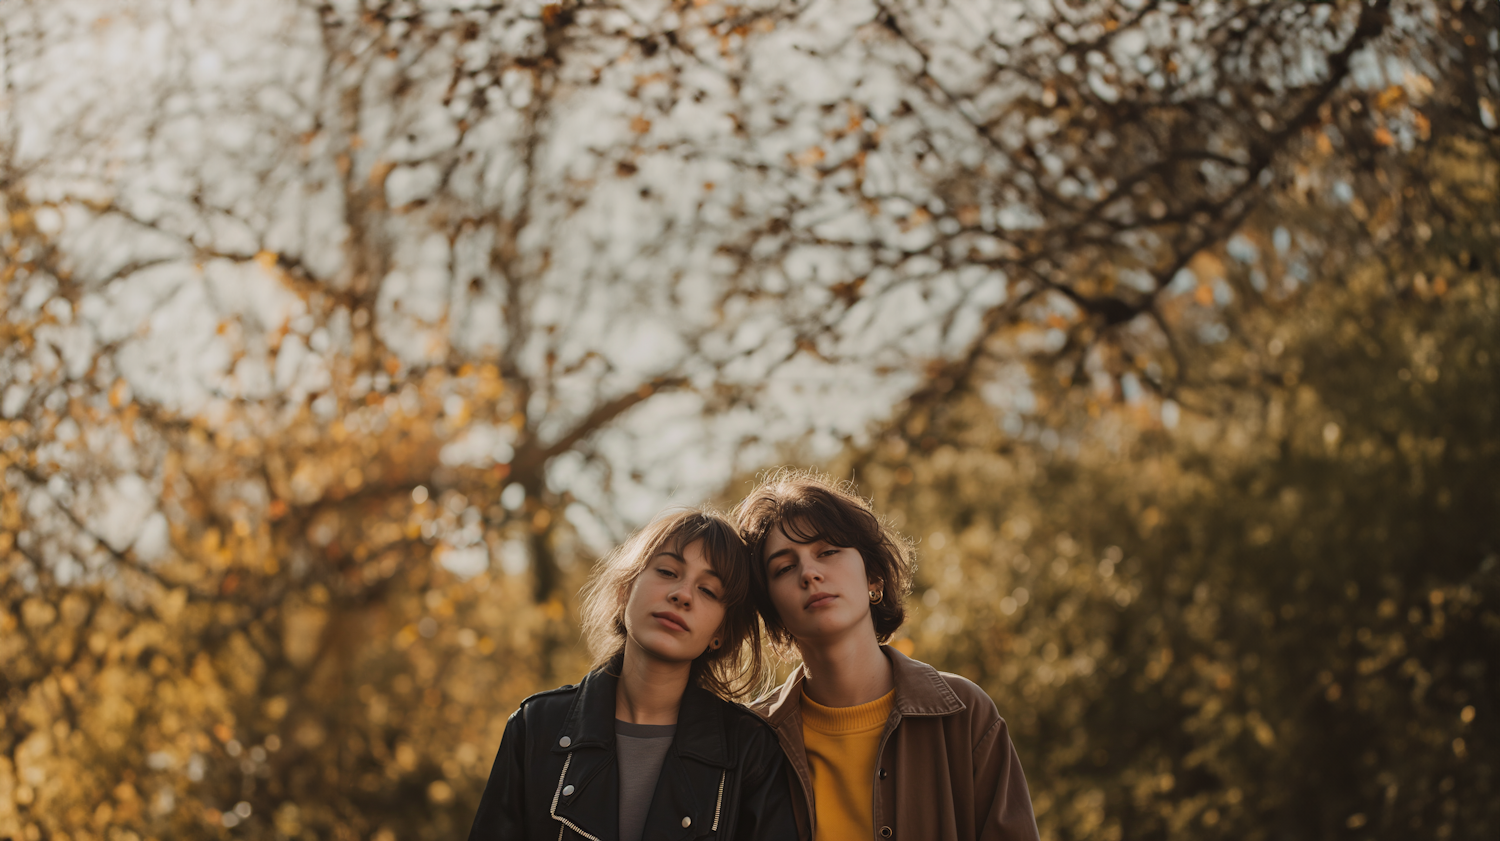 Autumn Serenity: A Portrait of Youthful Intimacy